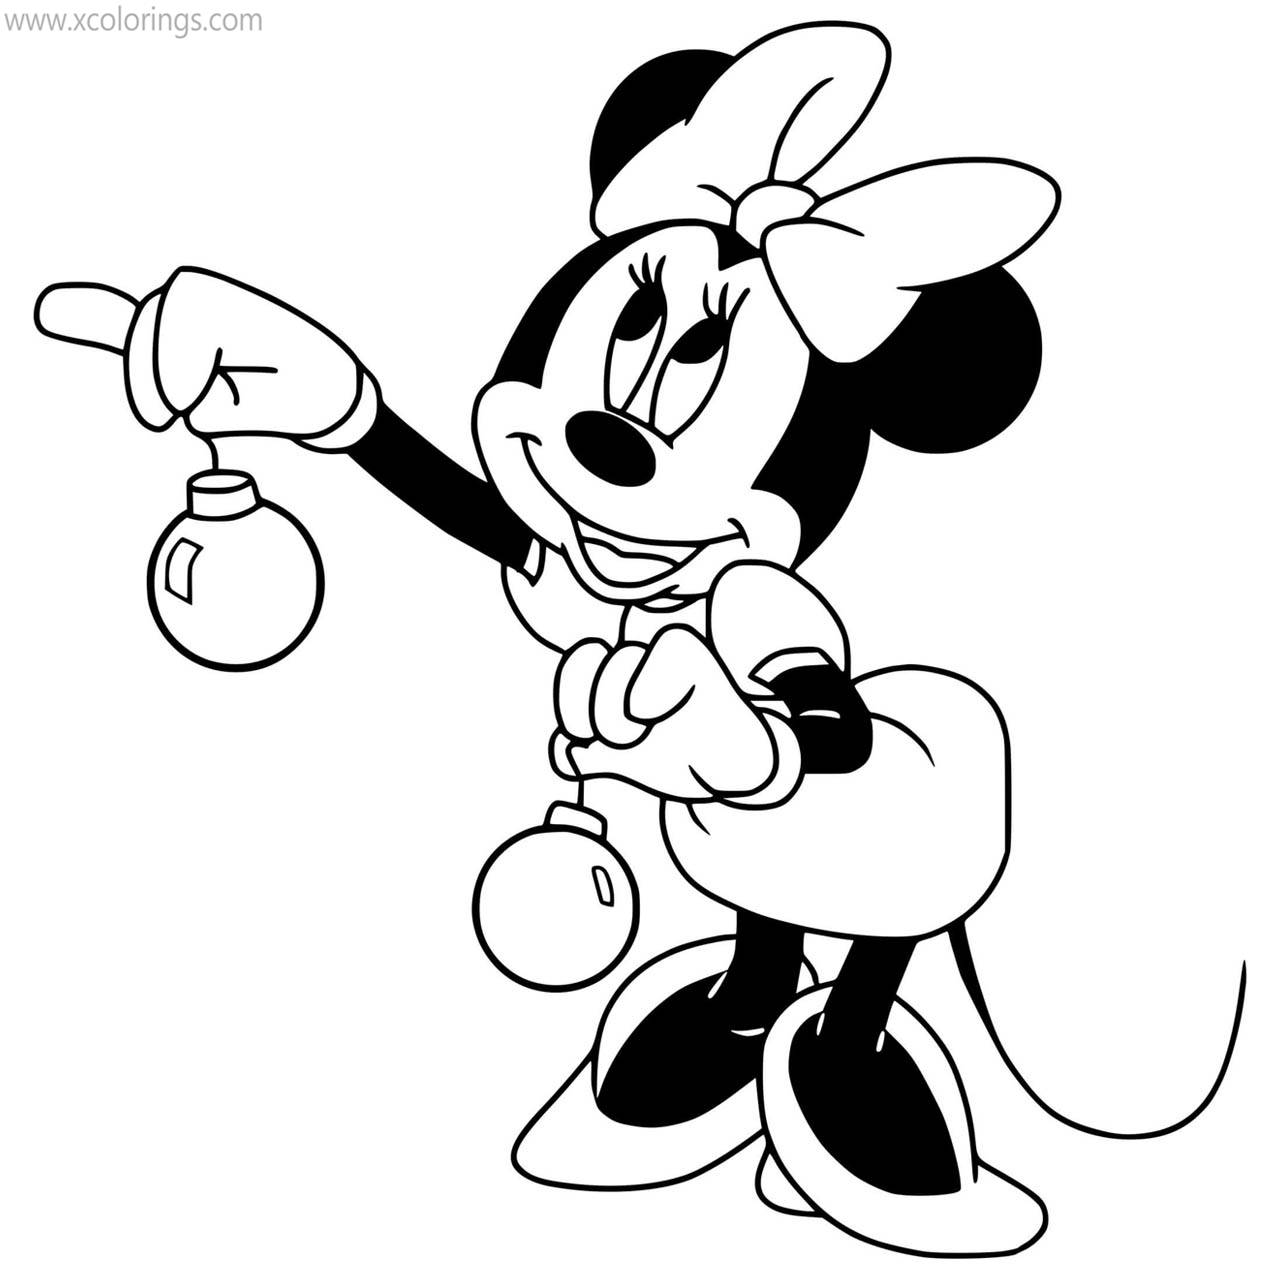 Free Minnie Mouse Christmas Ornaments Coloring Pages printable